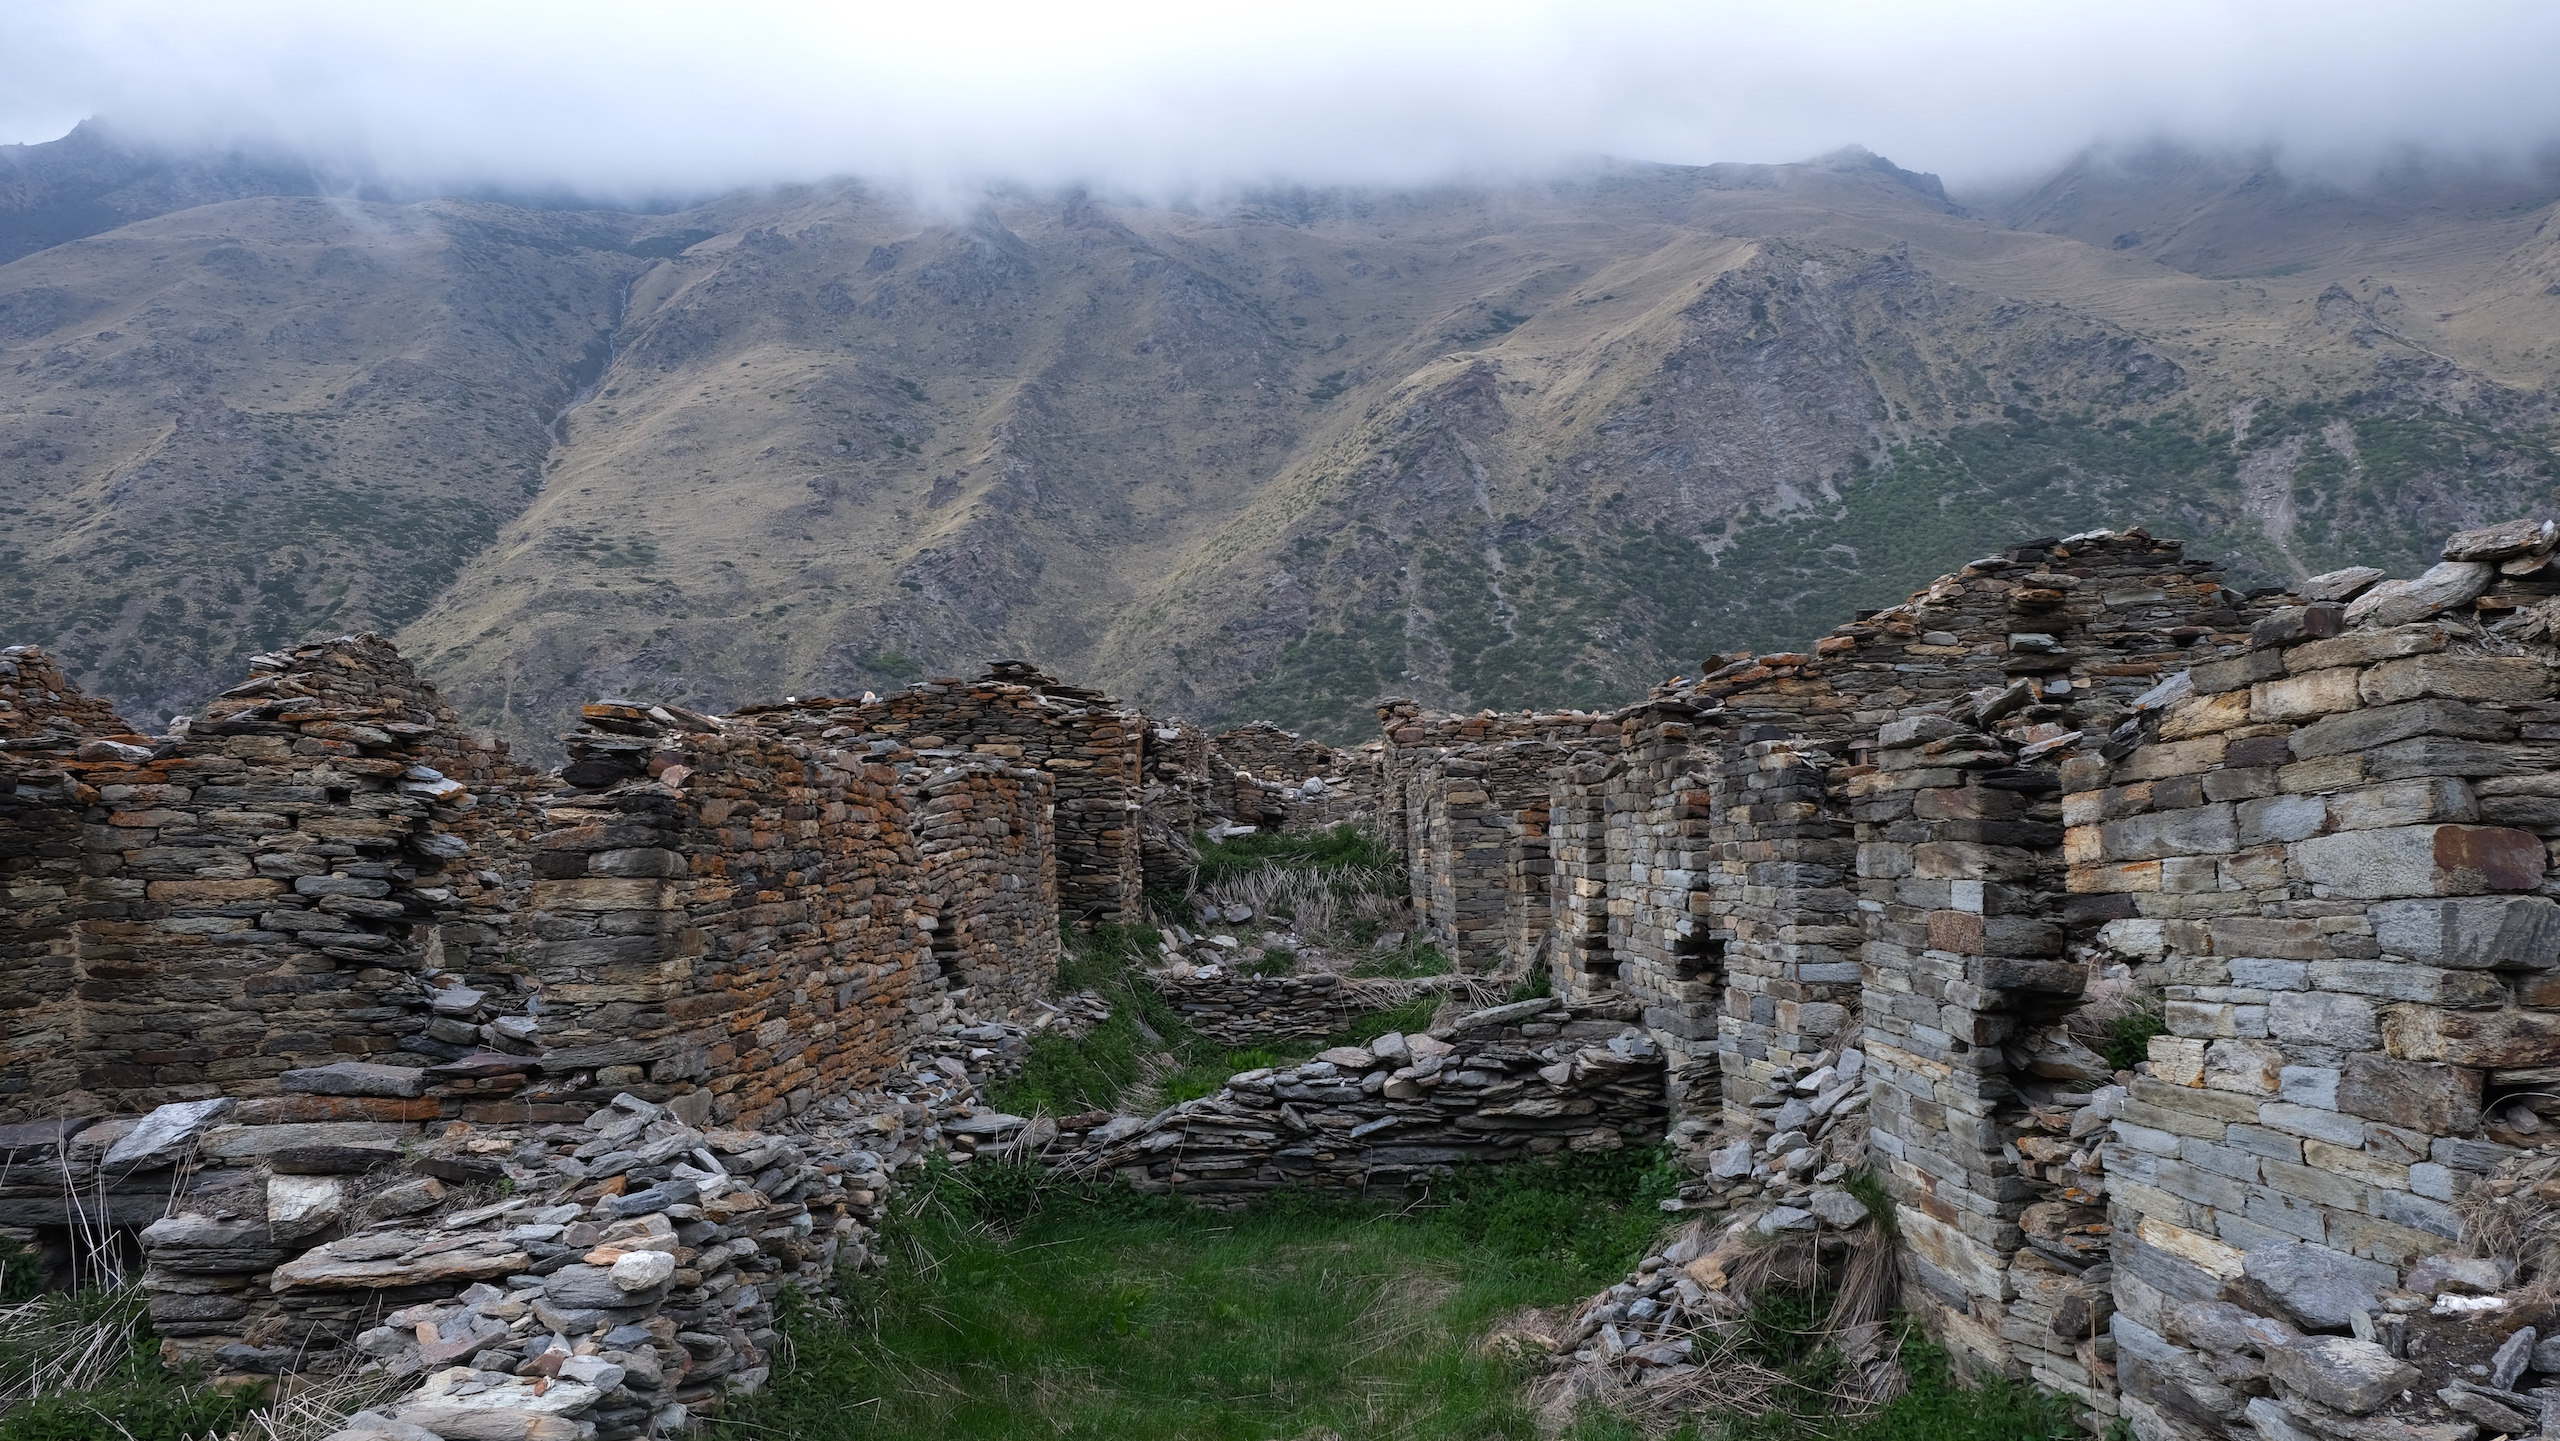 Abandoned houses in Martoli village, Johar Valley. Now mostly depopulated, only four homes are still inhabited for a portion of the year in Martoli